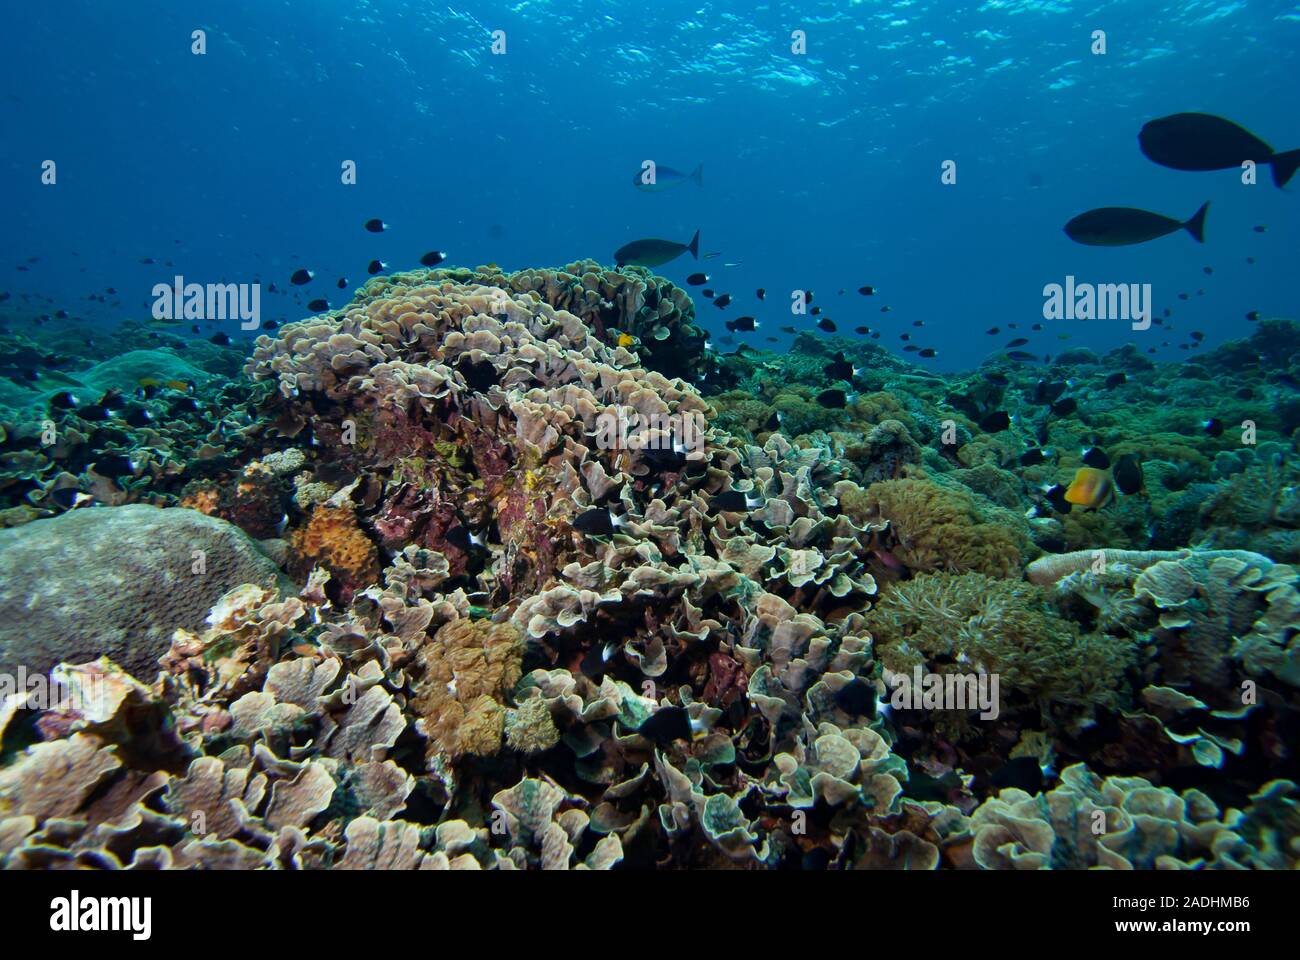 Underwater Tropical Coral Reefs Stock Photo